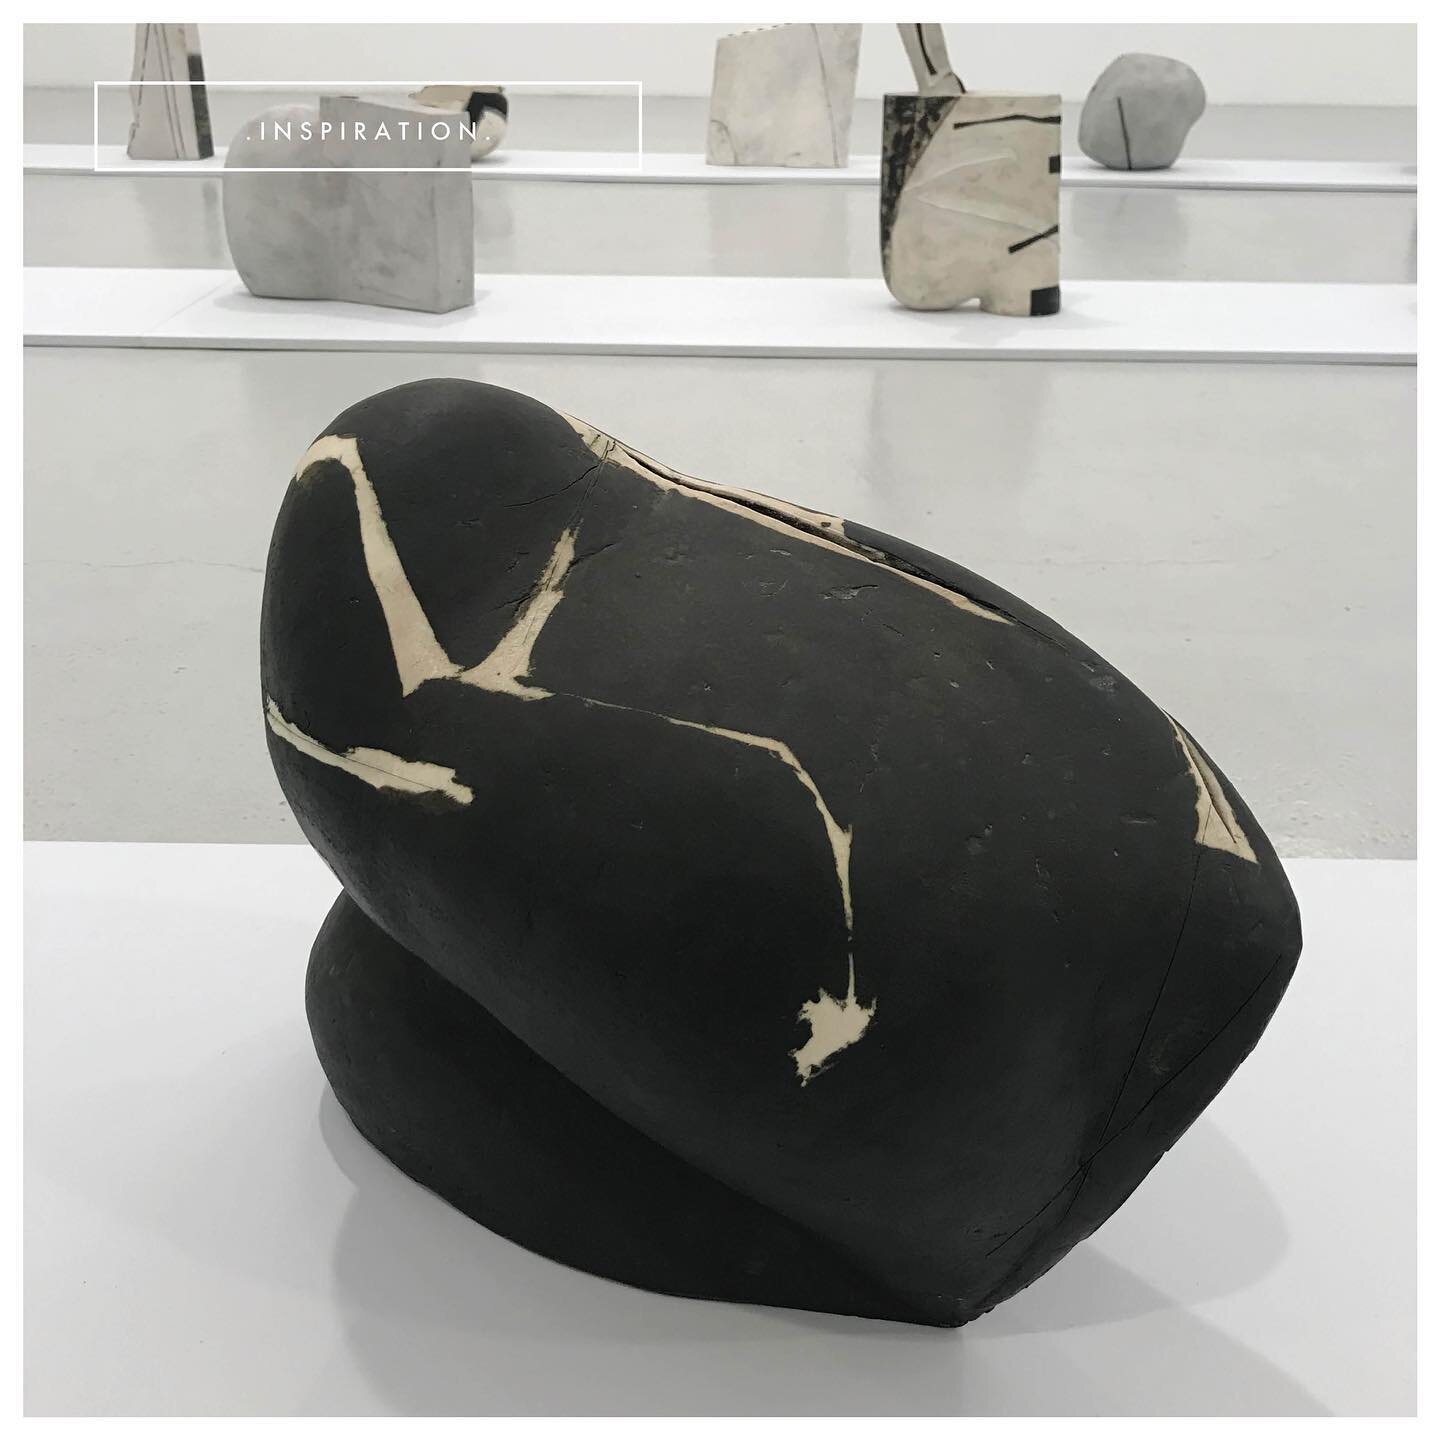 | Gordon Baldwin |
&bull;
Born in Lincoln in 1932, Gordon Baldwin studied at the Lincoln School of Art and later at Central School of Art and Design. His early work featured functional stoneware and tin-glazed earthenware vessels, thrown on the wheel